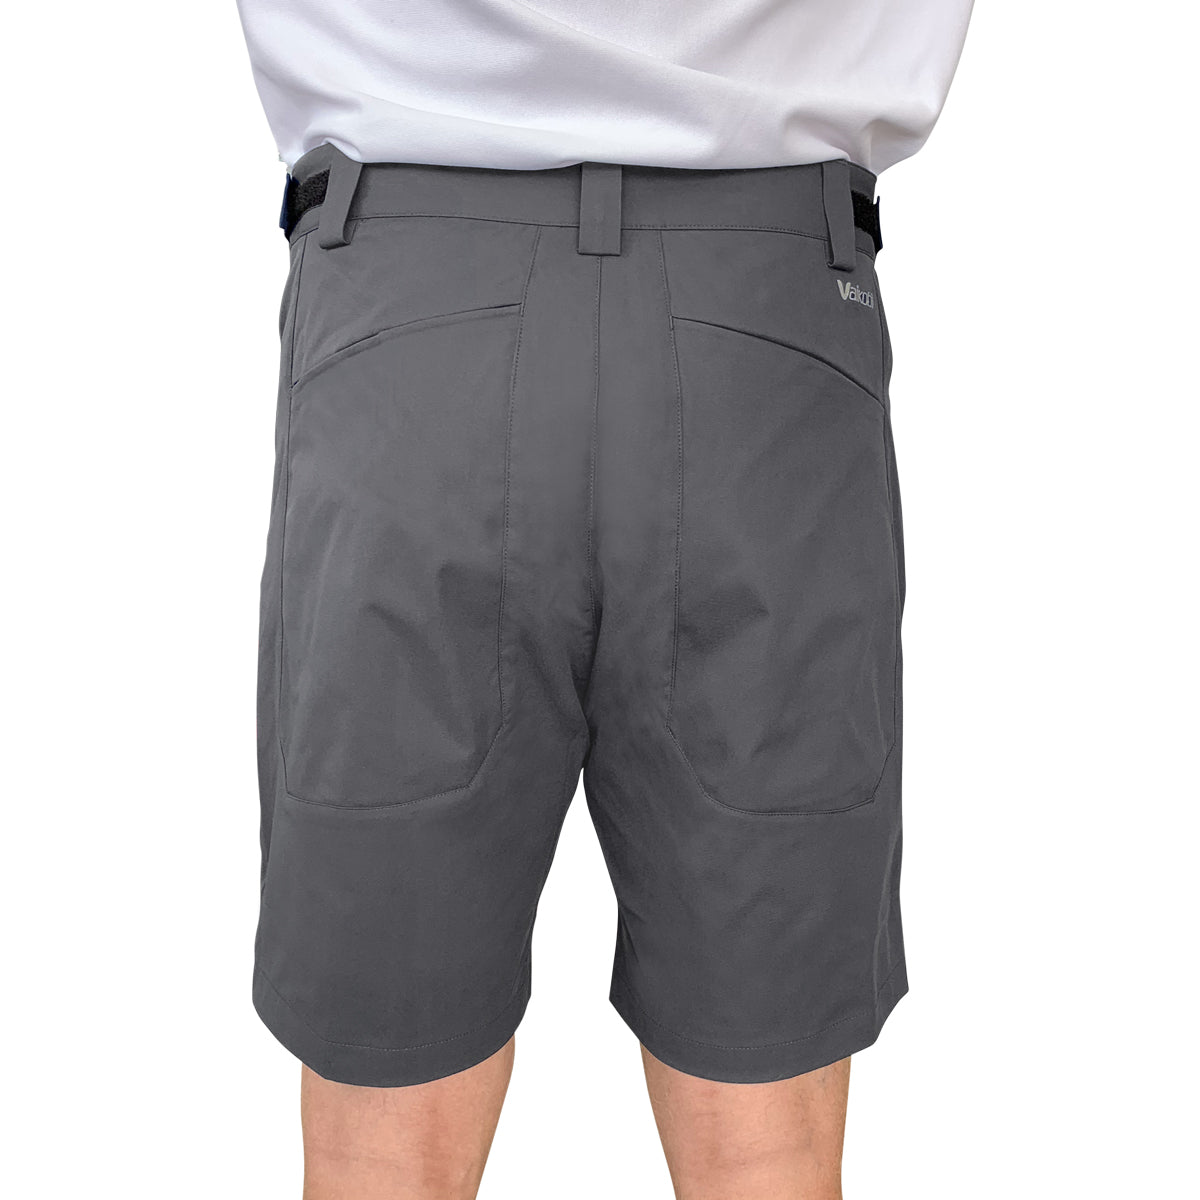 Biscayne Shorts - Charcoal